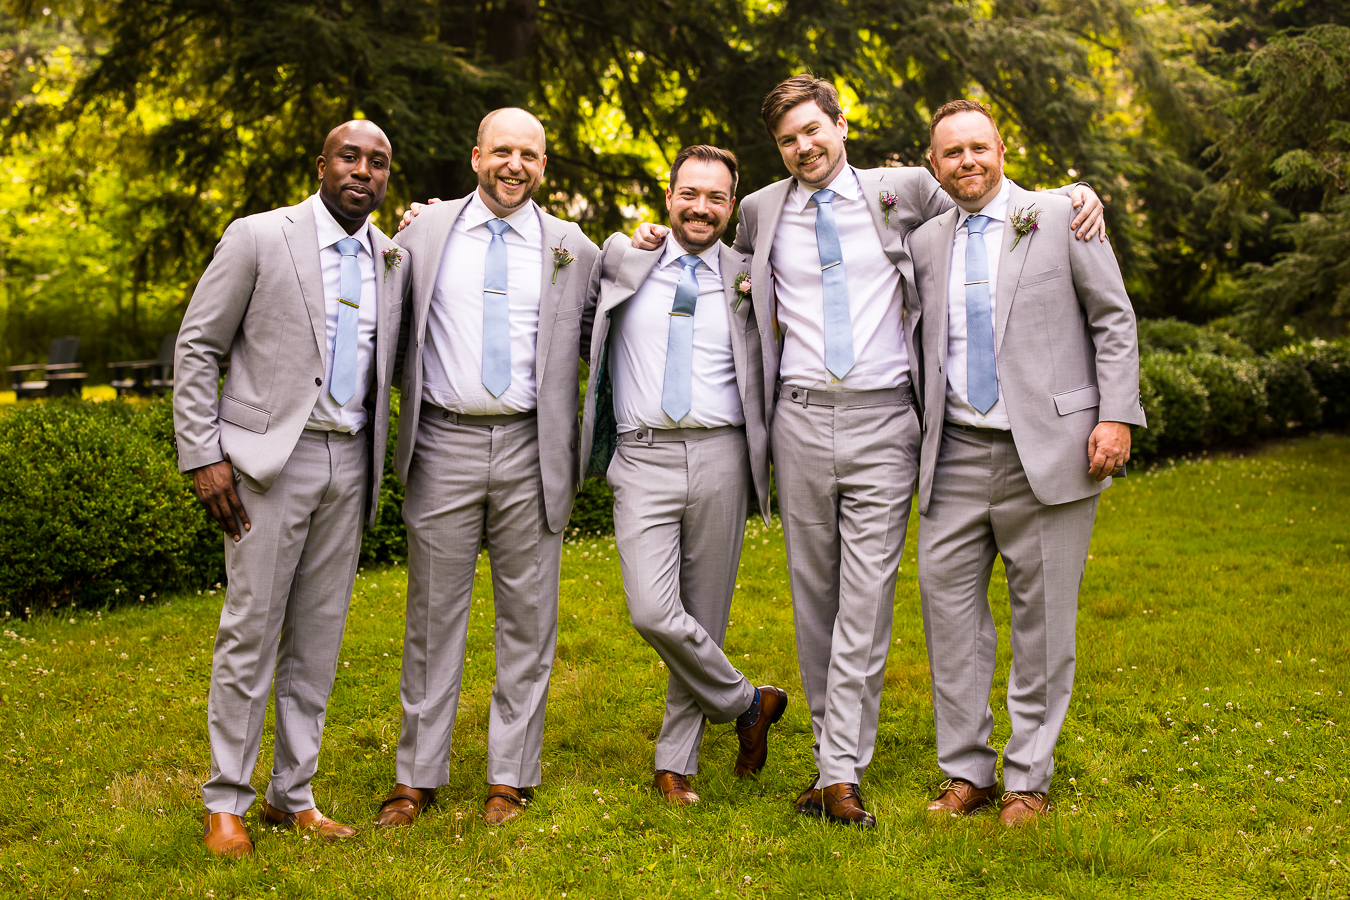 candid photographer, lisa rhinehart, captures this image of the groom with her groomsmen laughing and smiling at the camera in a relaxed line 